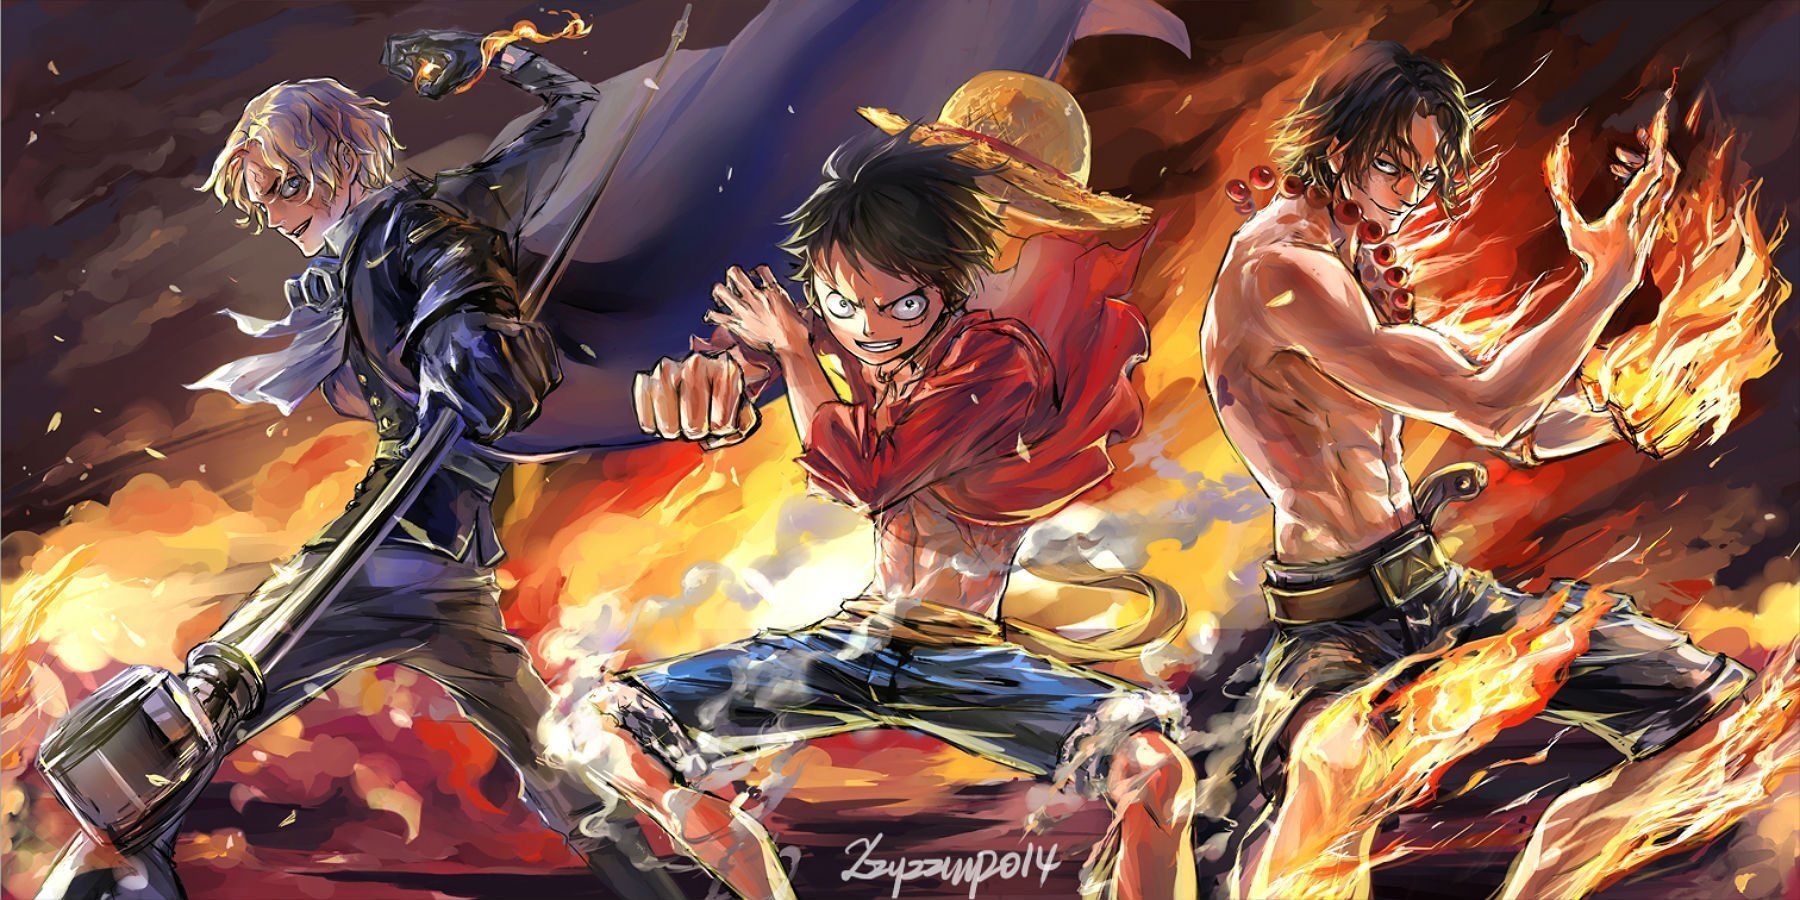 Luffy, Ace, and Sabo are ready to fight in this One Piece wallpaper. - One Piece